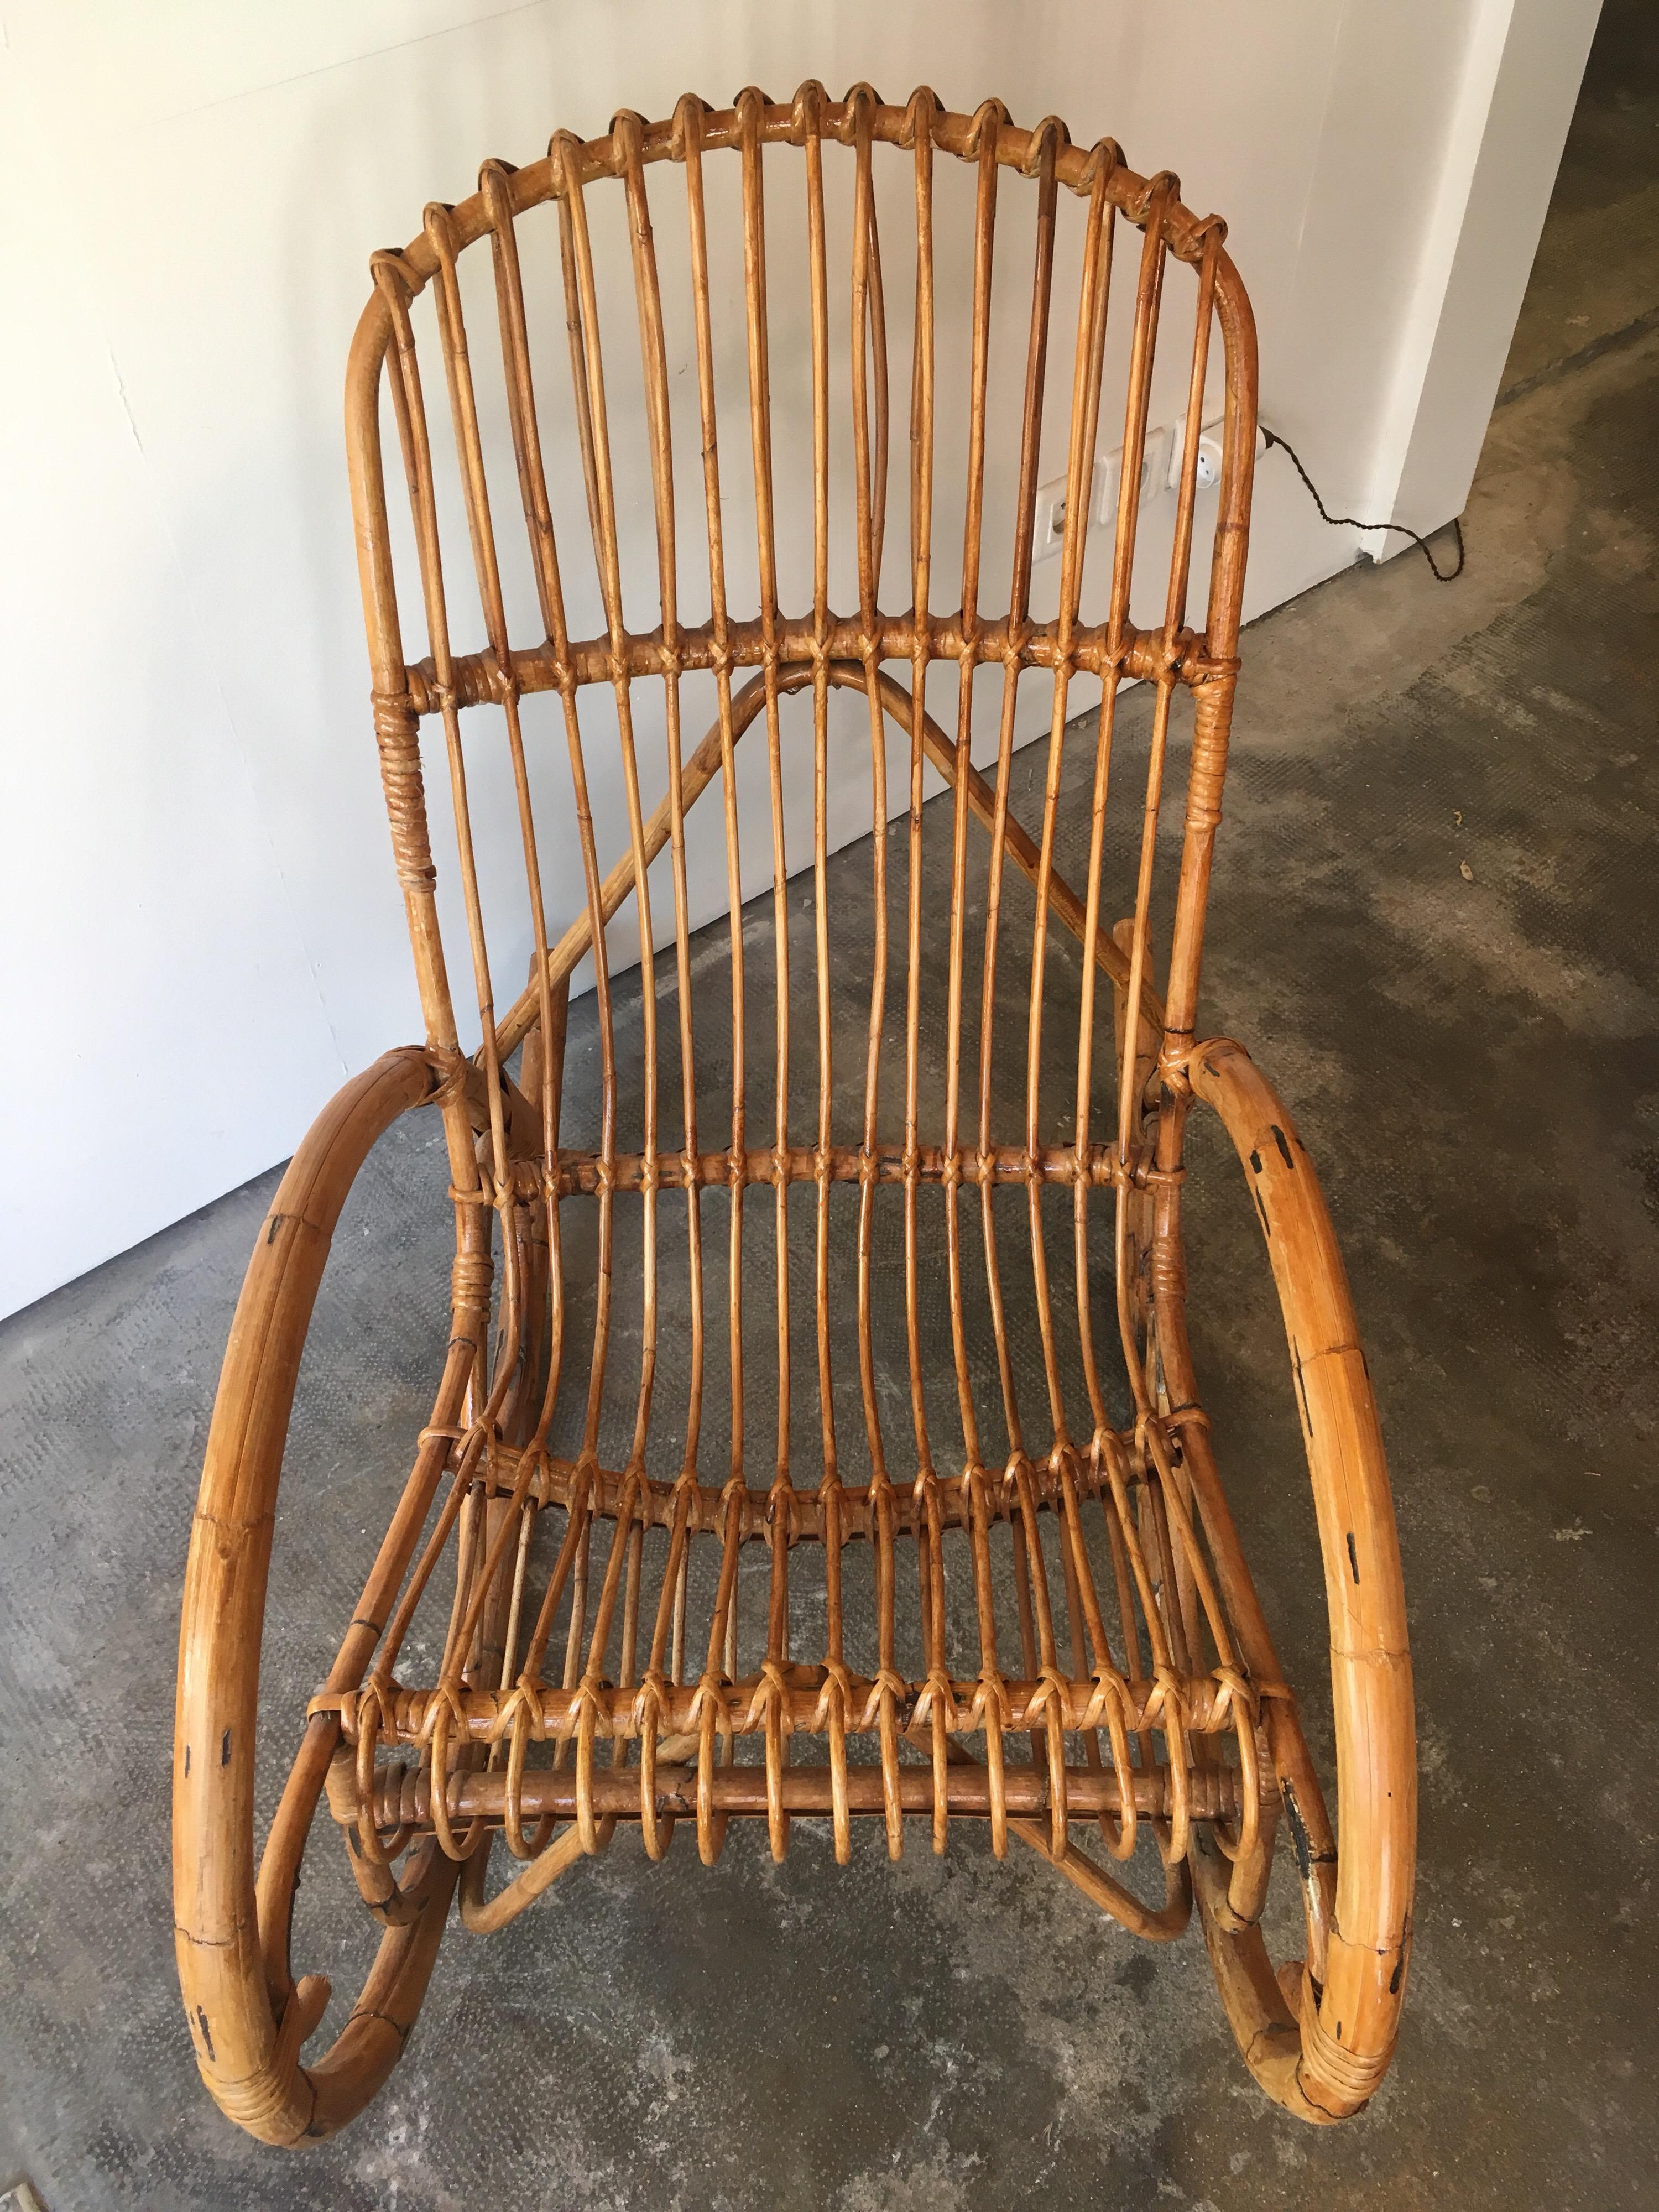 Beautiful bamboo and rattan rocking chair, circa 1970.
In very good condition.
Really nice European work.
A perfect piece of furniture that could suits perfectly in our garden!